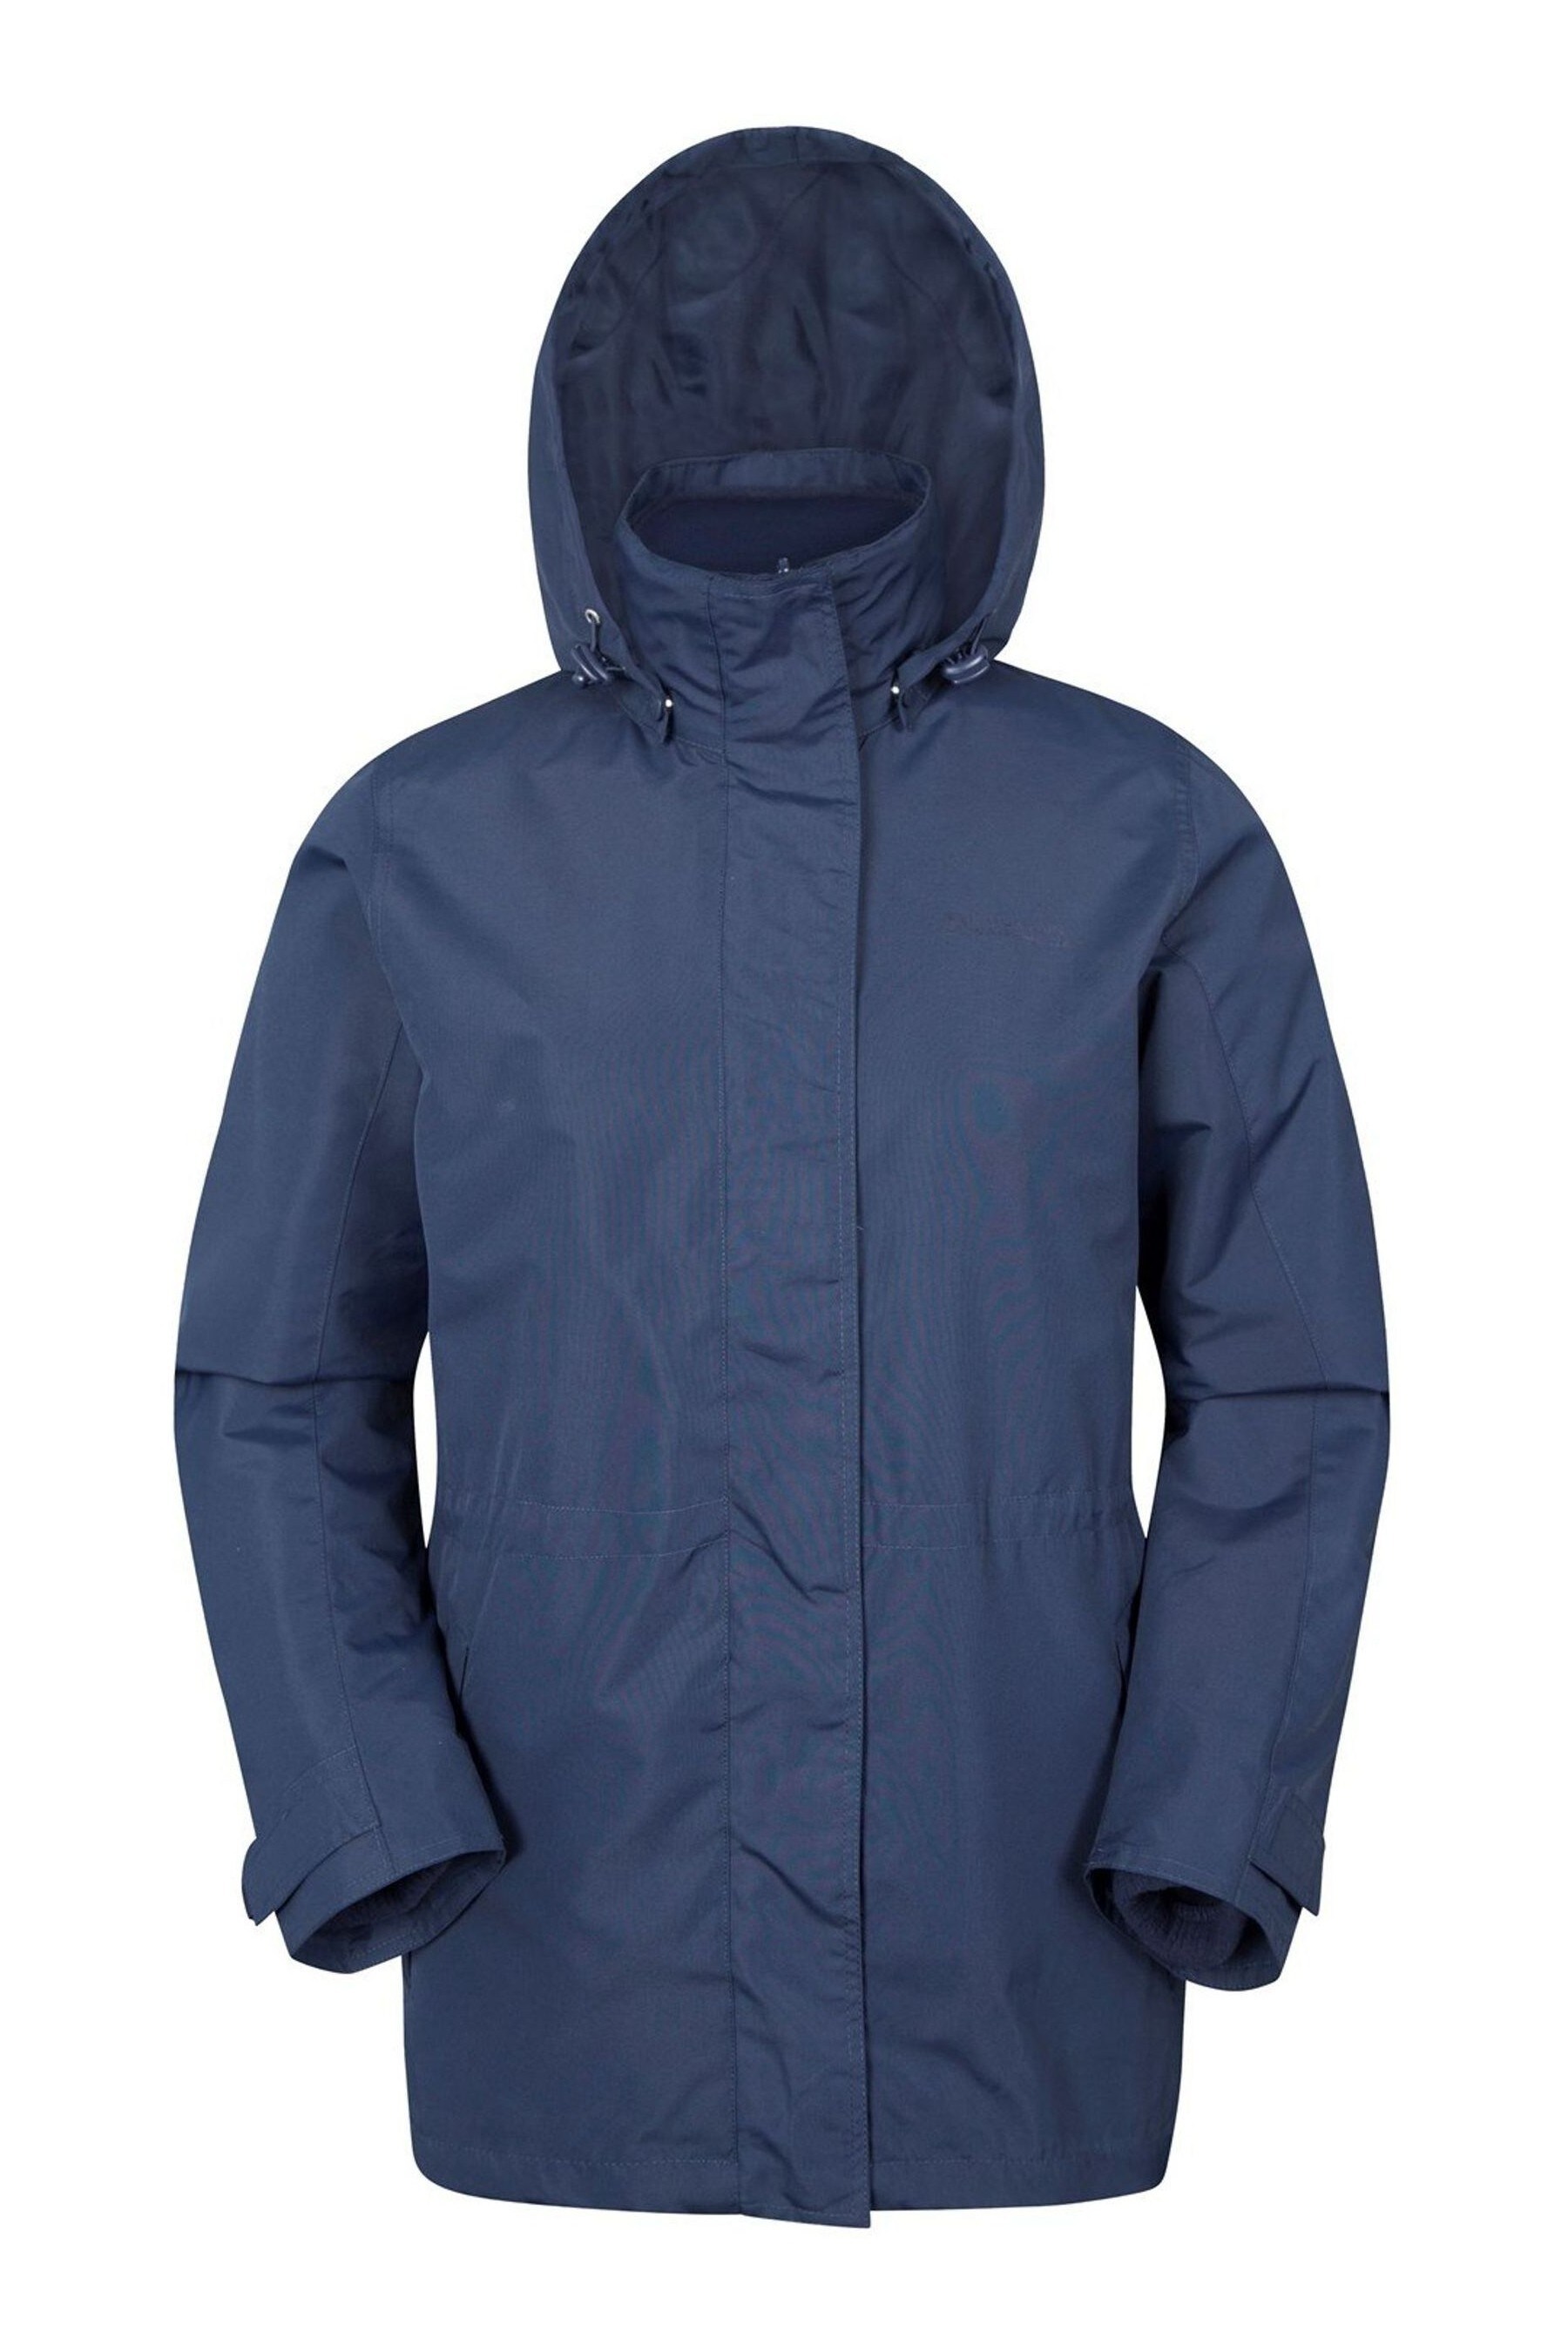 Buy Mountain Warehouse Fell Womens 3 In 1 Water-Resistant Jacket from ...